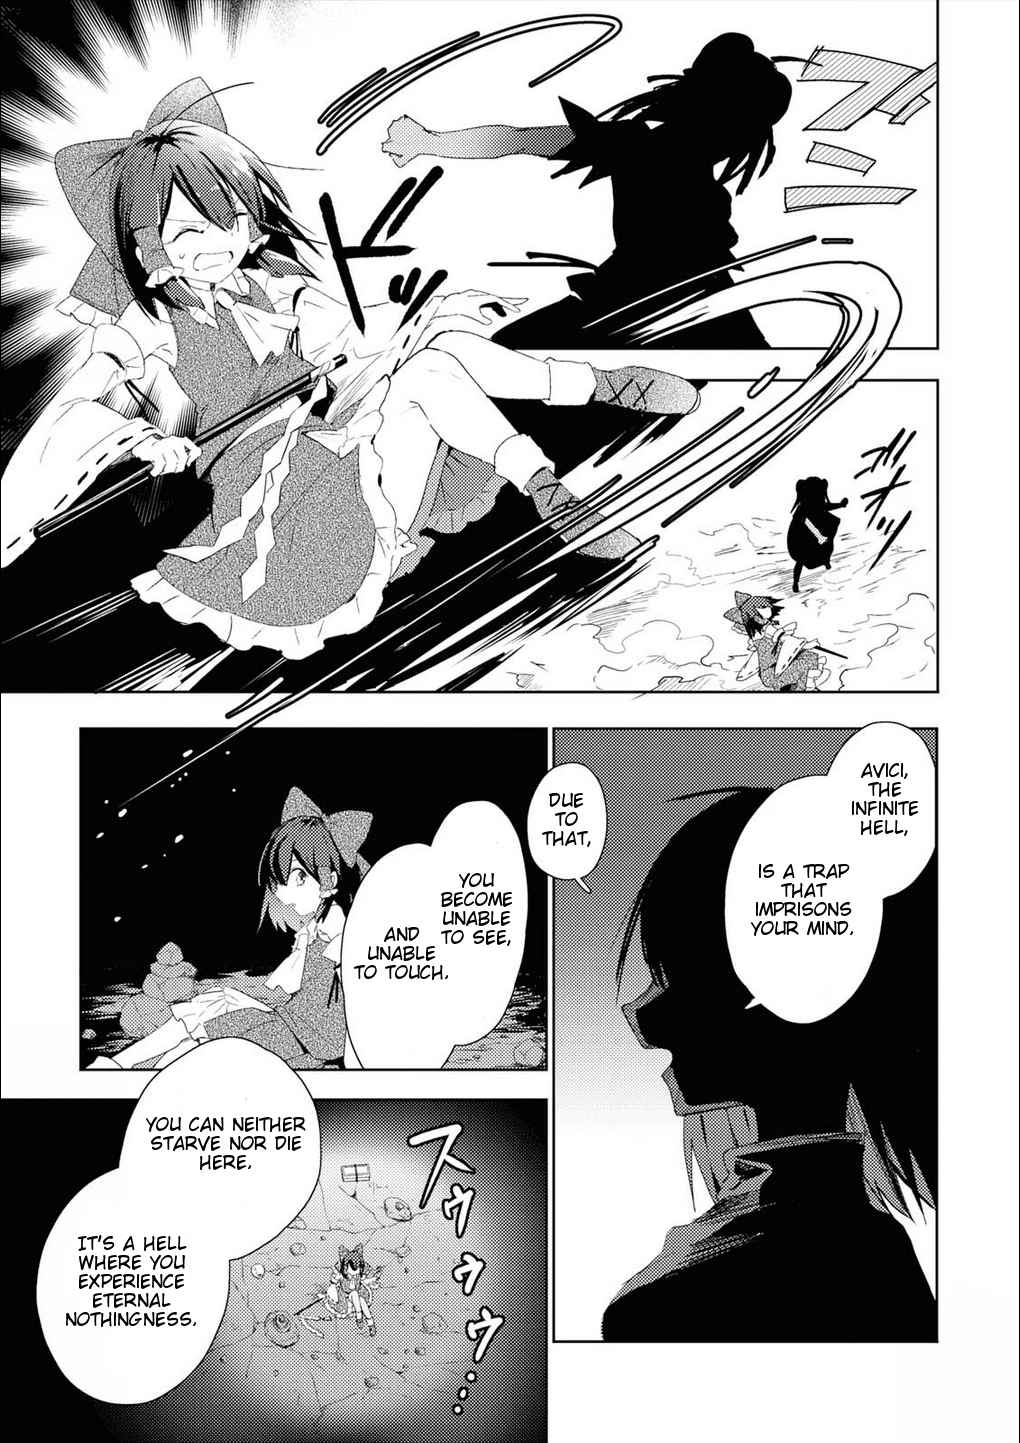 Touhou Ibara Kasen ~ Wild and Horned Hermit. Vol. 10 Ch. 49 The Inhuman Talent Embracing Wickedness (Part 1)